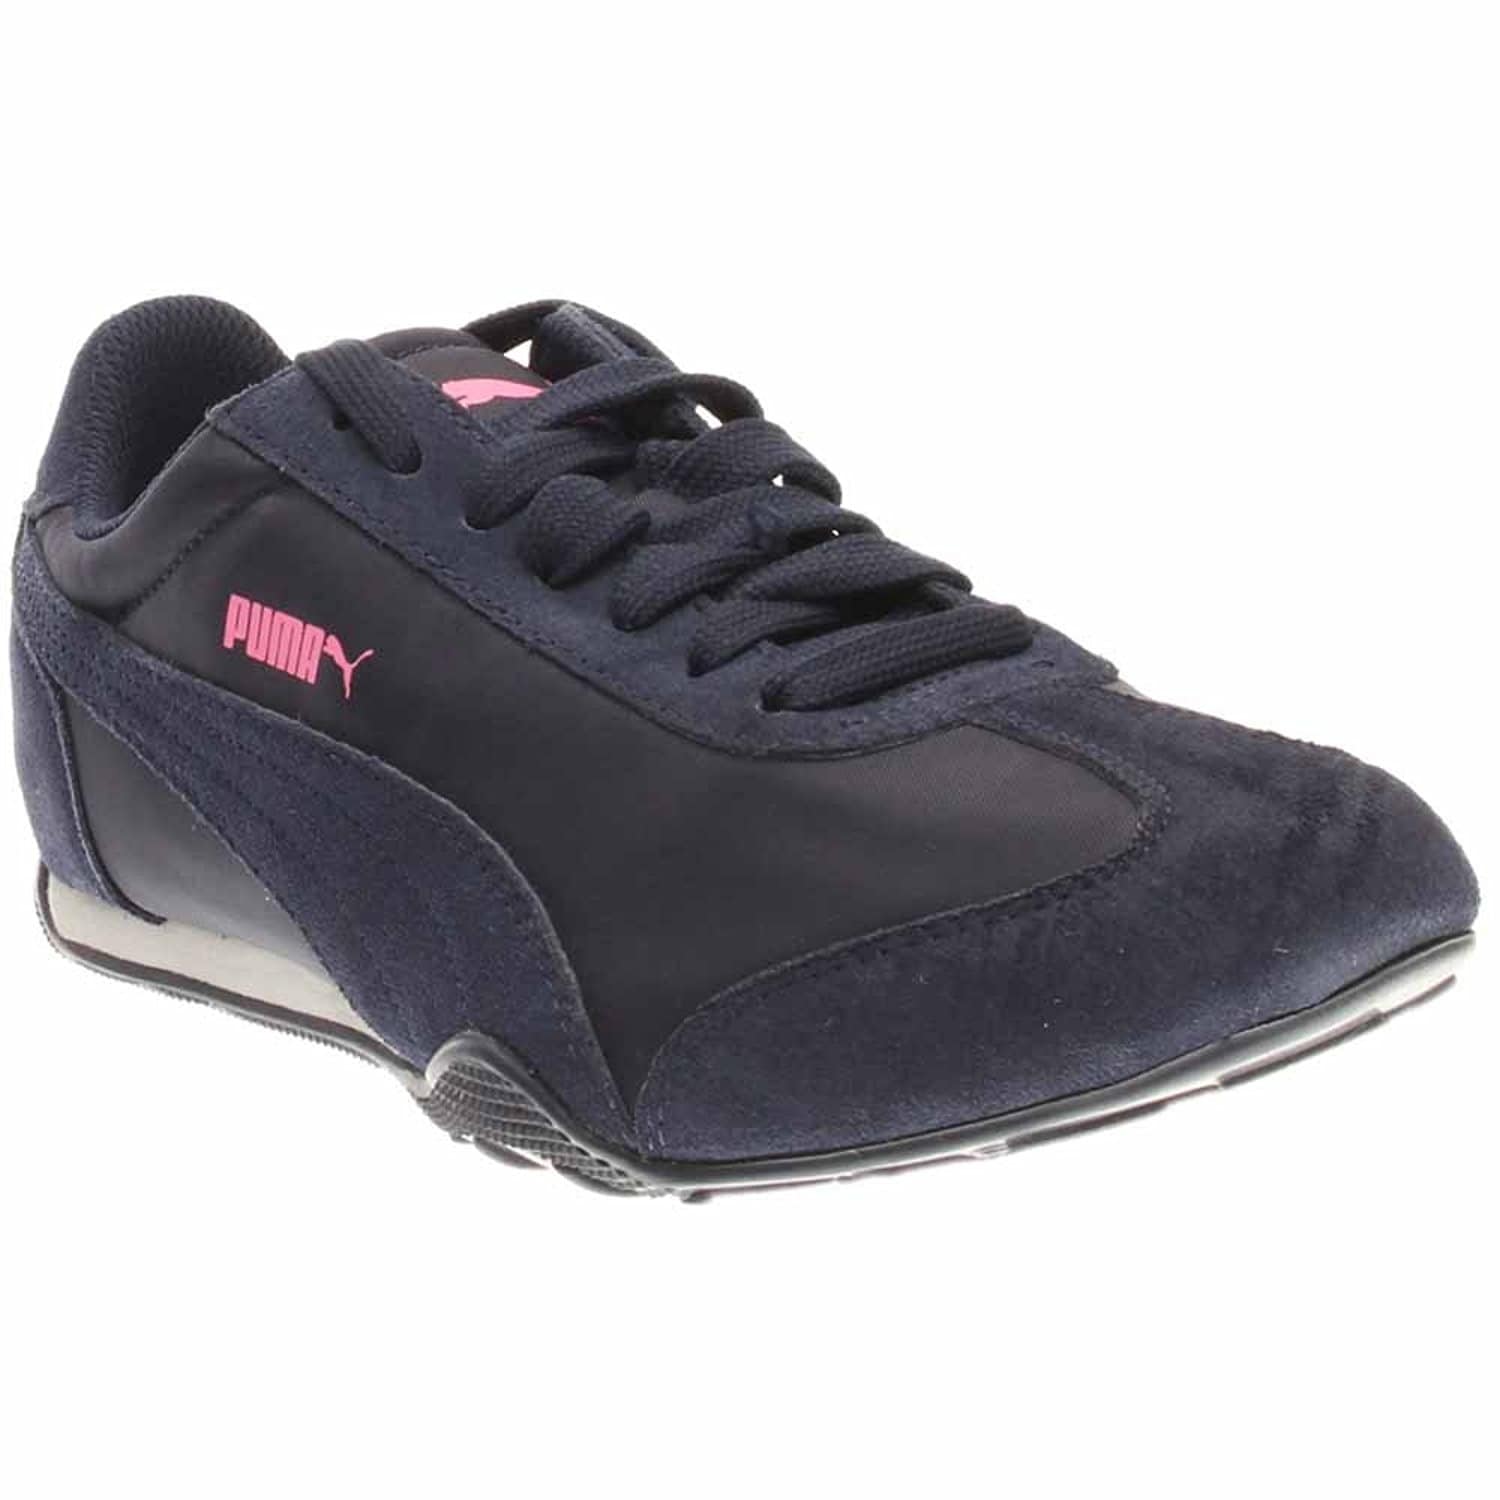 puma 76 runner women's athletic shoes